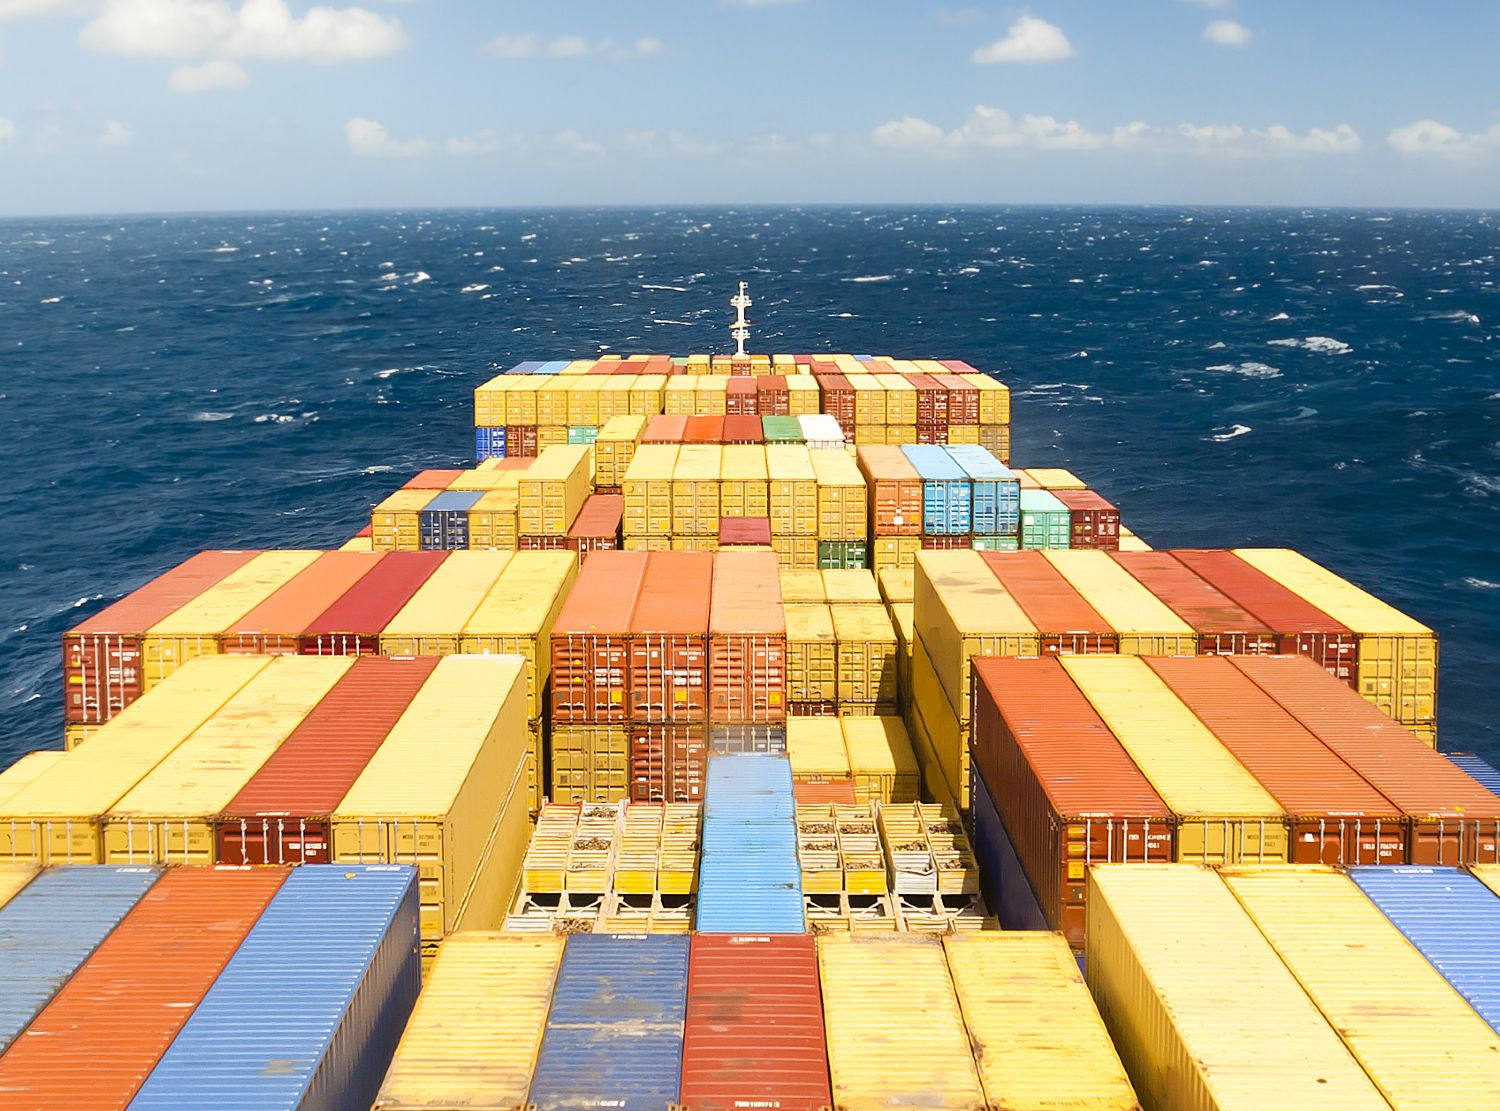 Shipping containers on a ship at sea